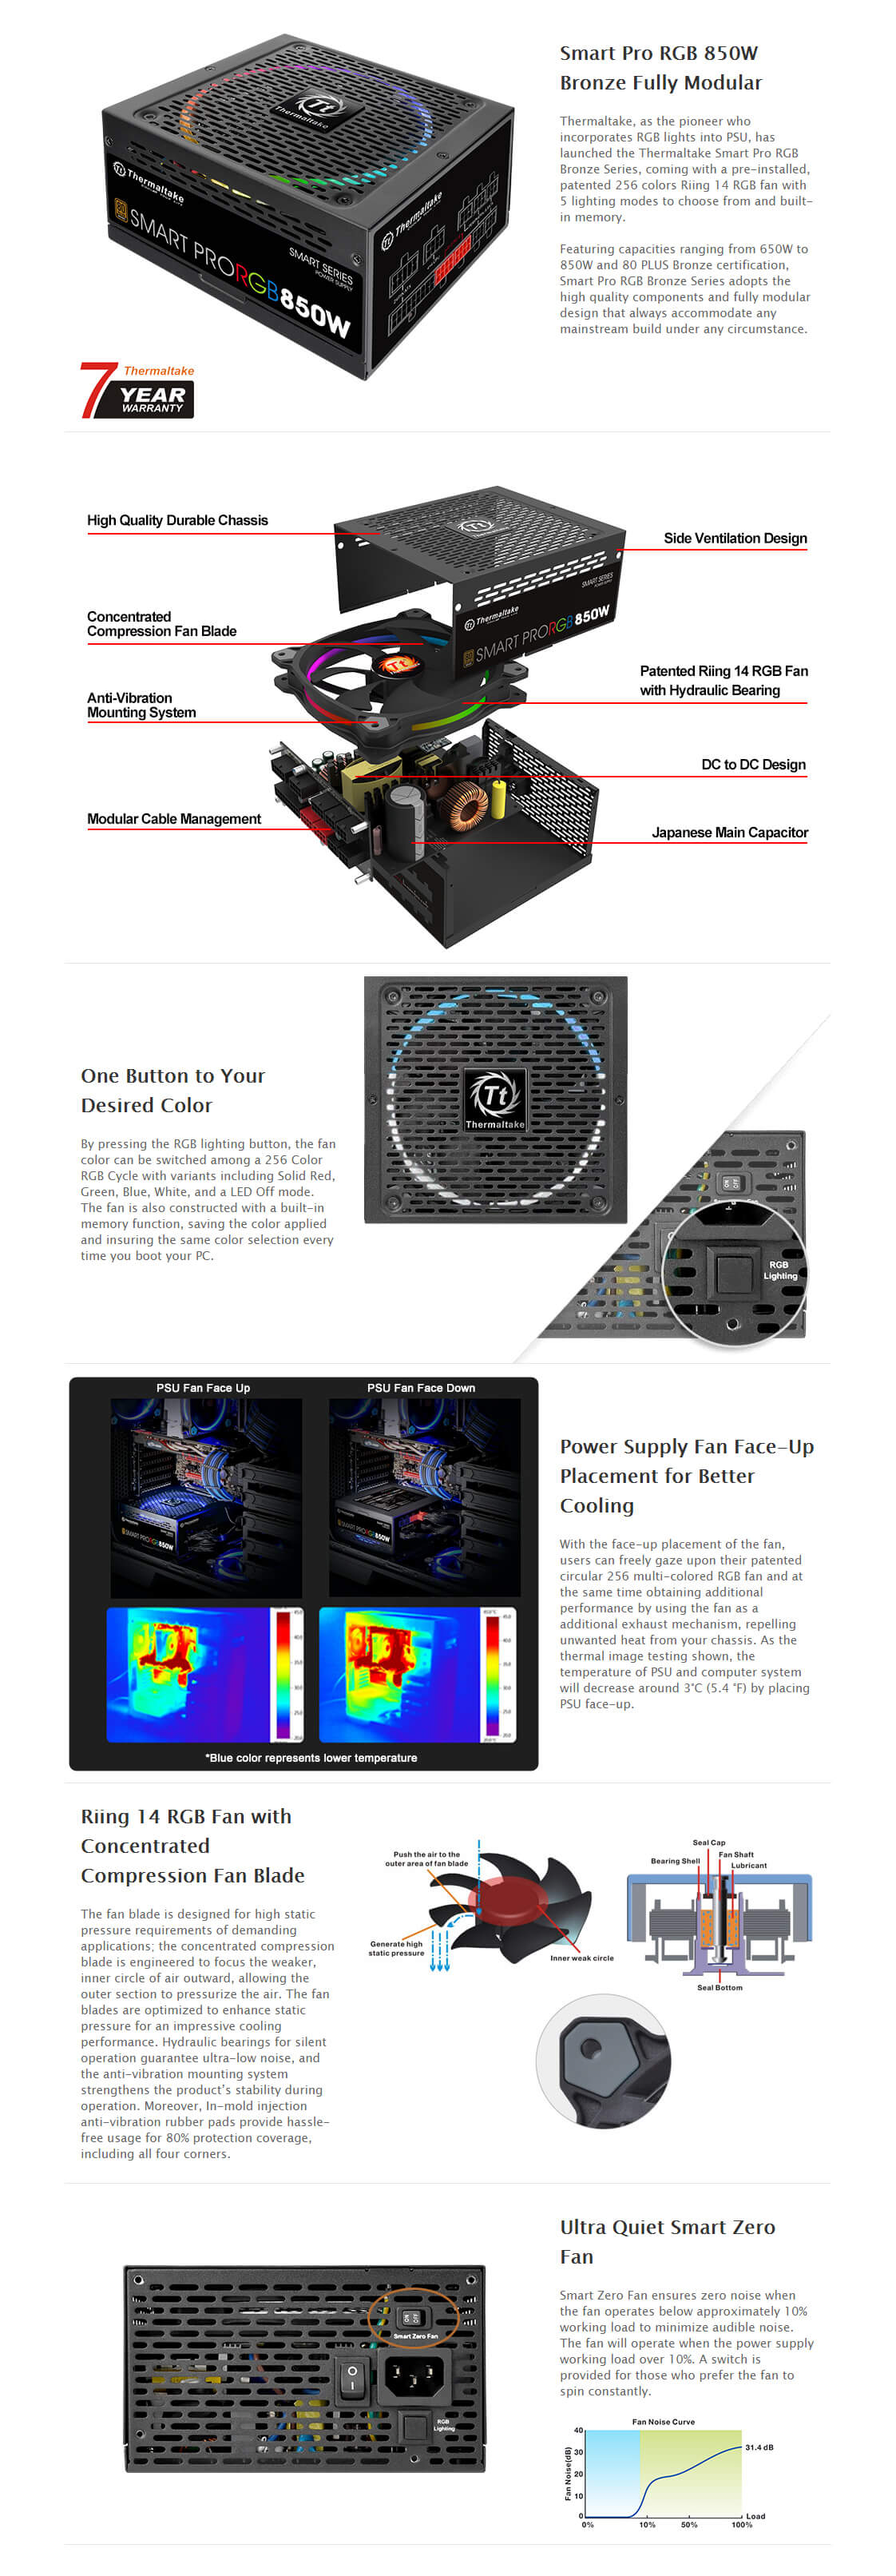 A large marketing image providing additional information about the product Thermaltake Smart Pro RGB - 850W 80PLUS Bronze ATX Modular PSU - Additional alt info not provided